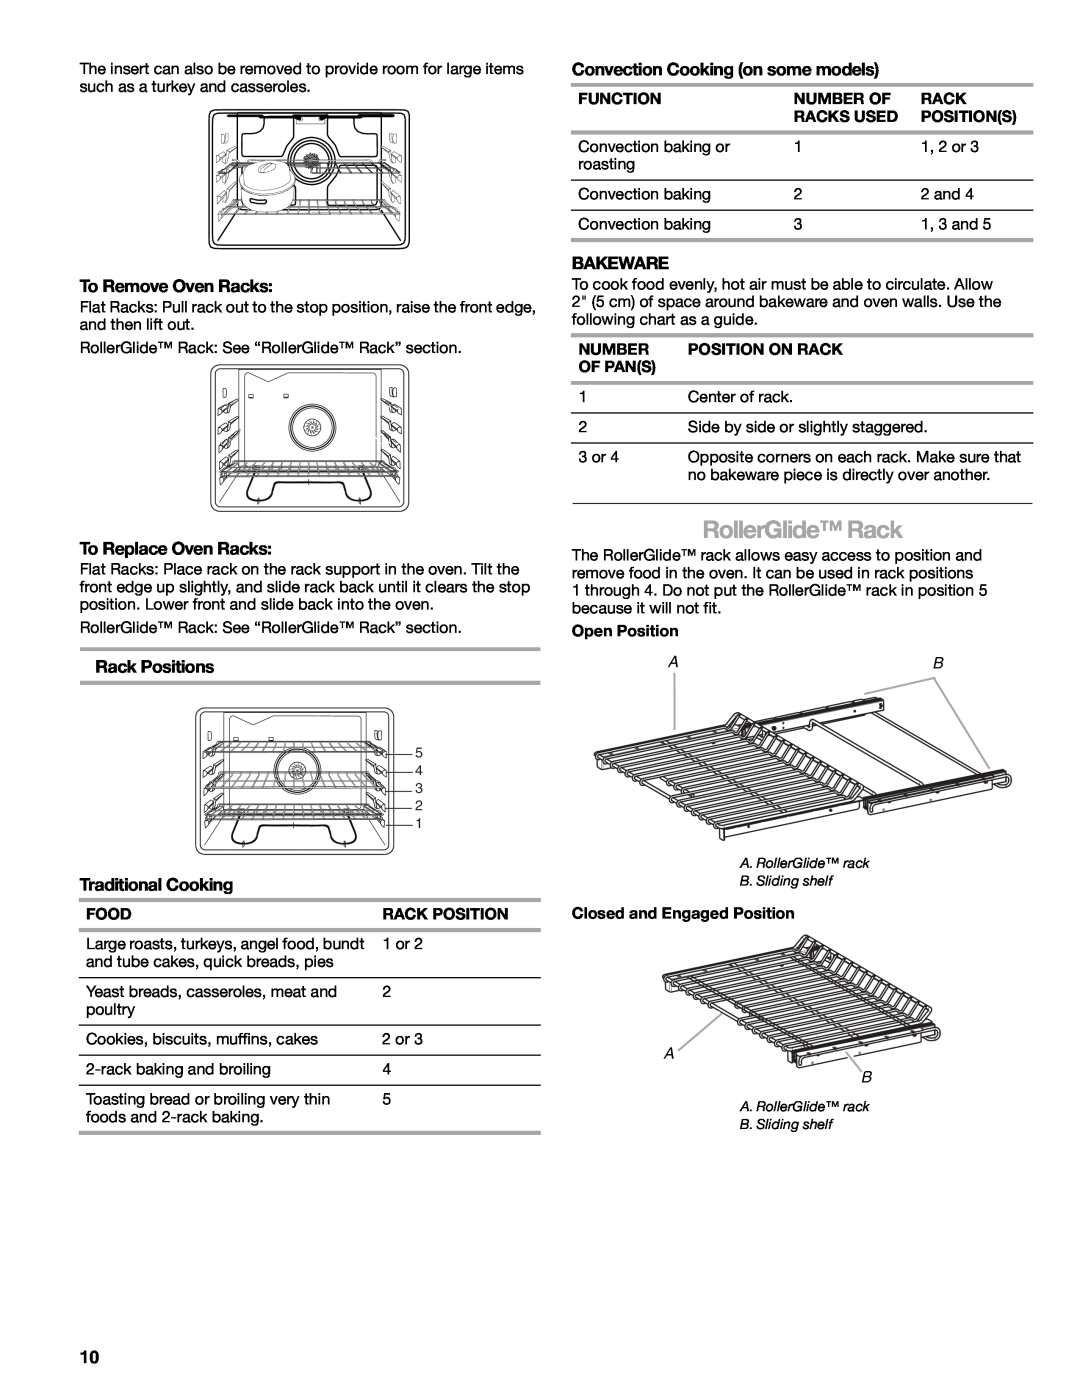 Kenmore W10166292A RollerGlide Rack, To Remove Oven Racks, Convection Cooking on some models, Bakeware, Rack Positions 